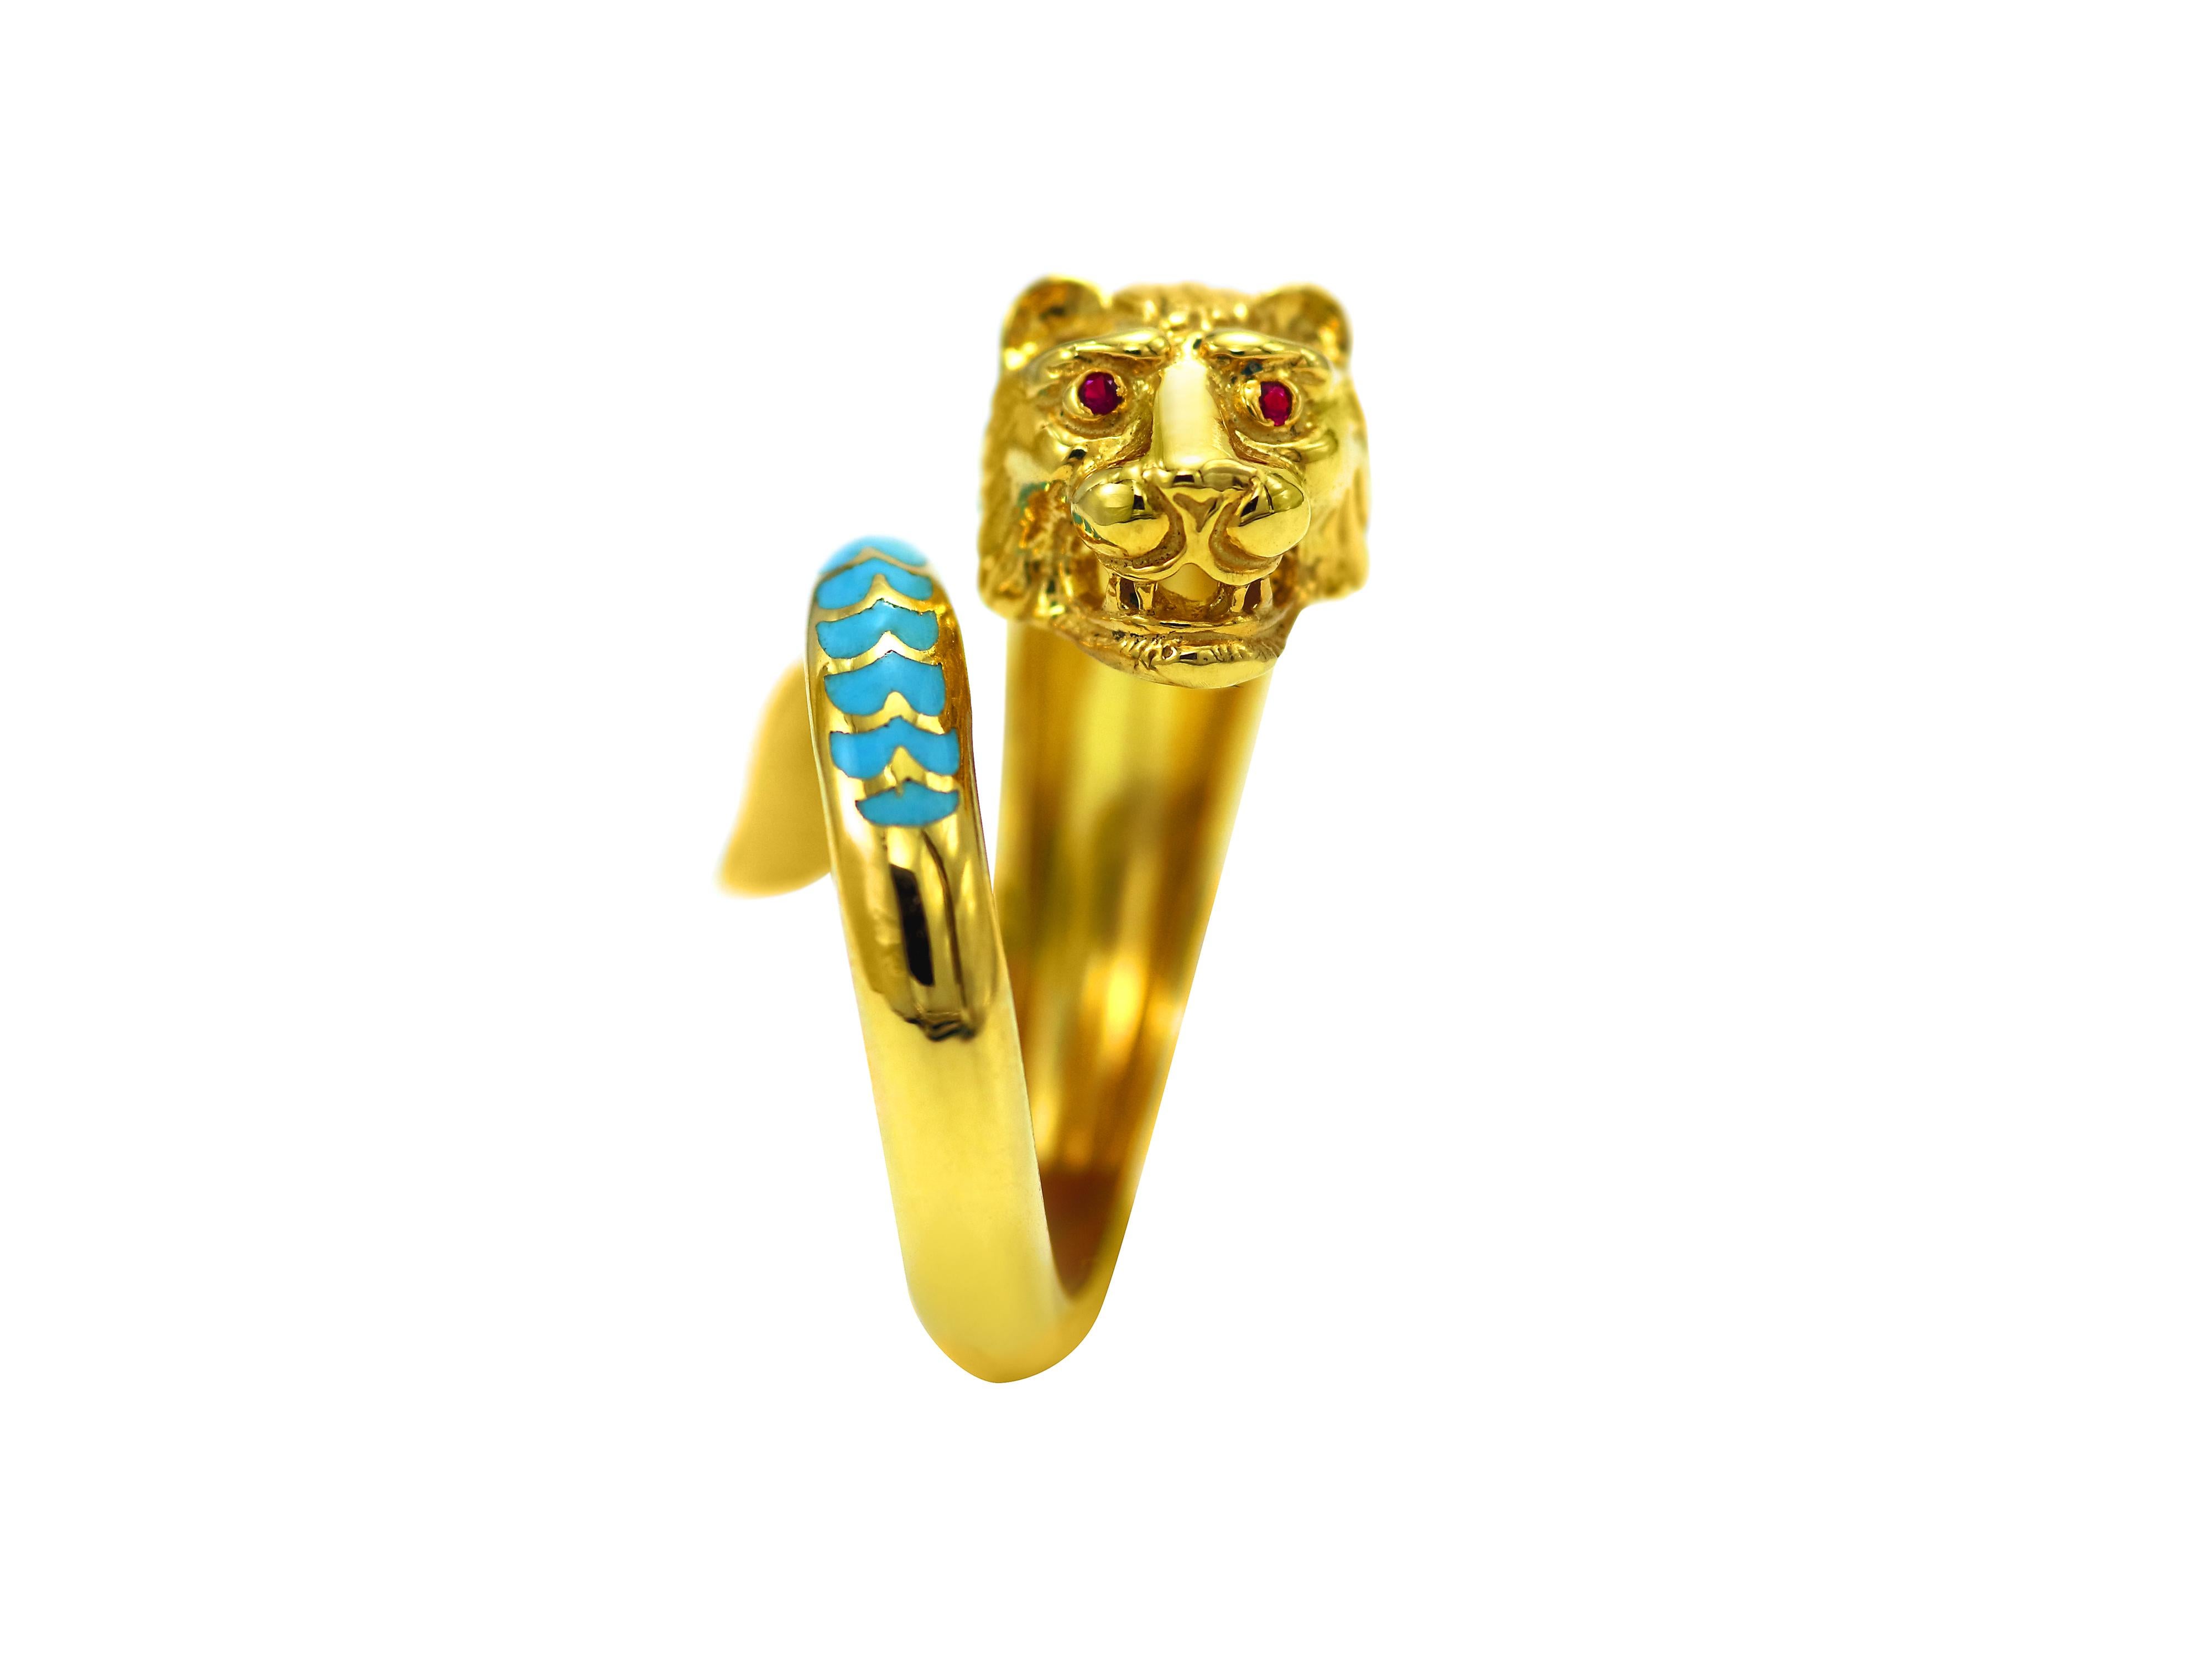 Dimos 18k Gold Lion Ring with Rubies and Diamonds 1